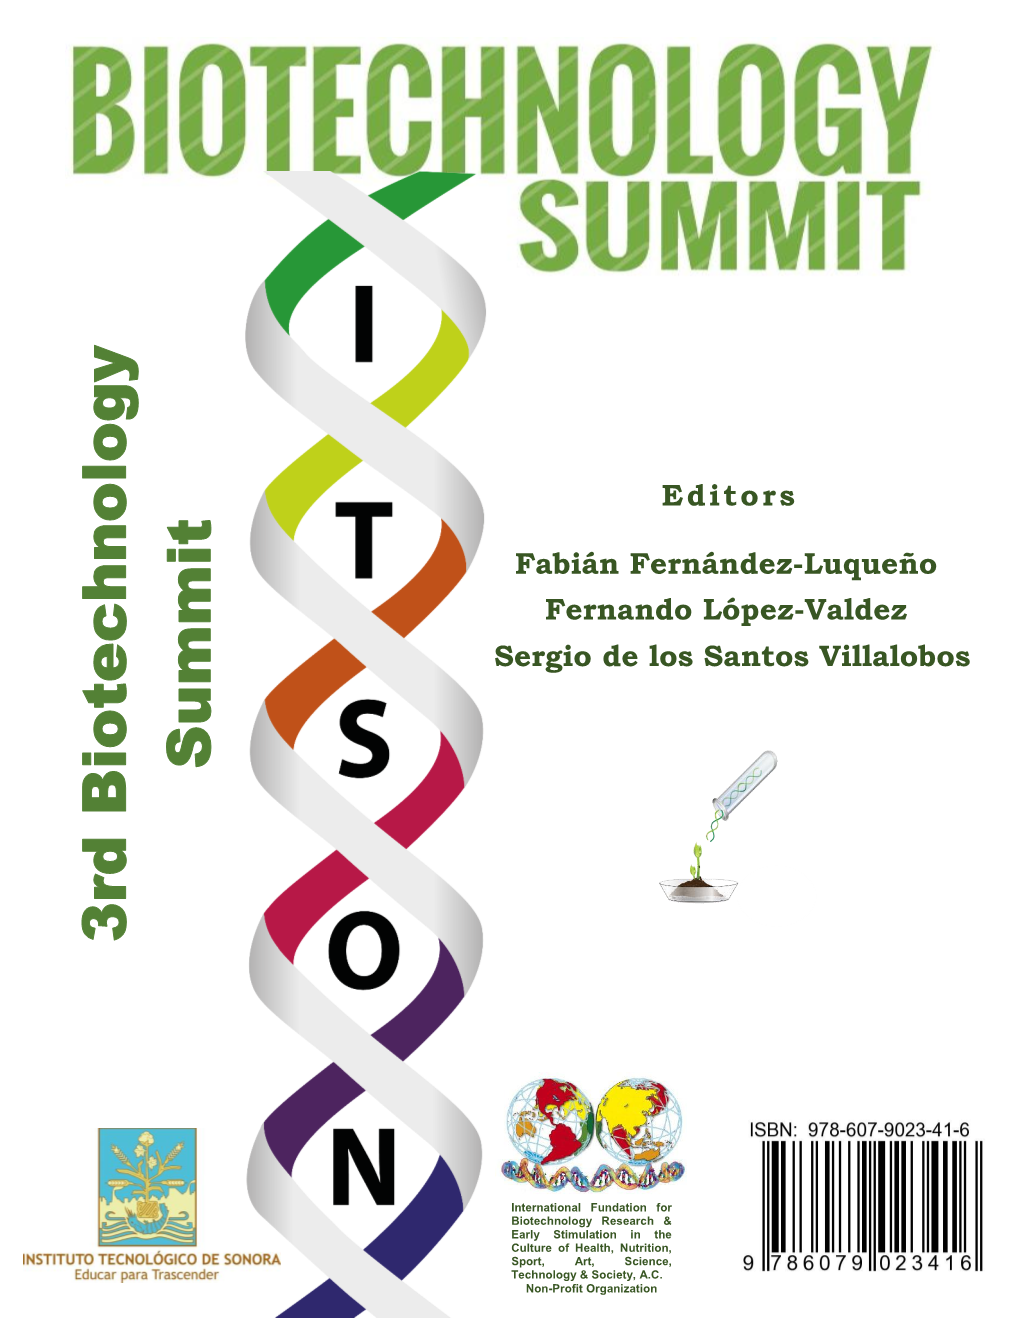 3Rd Biotechnology Summit 2016 Every Article Is Property and Responsibility of Their Authors